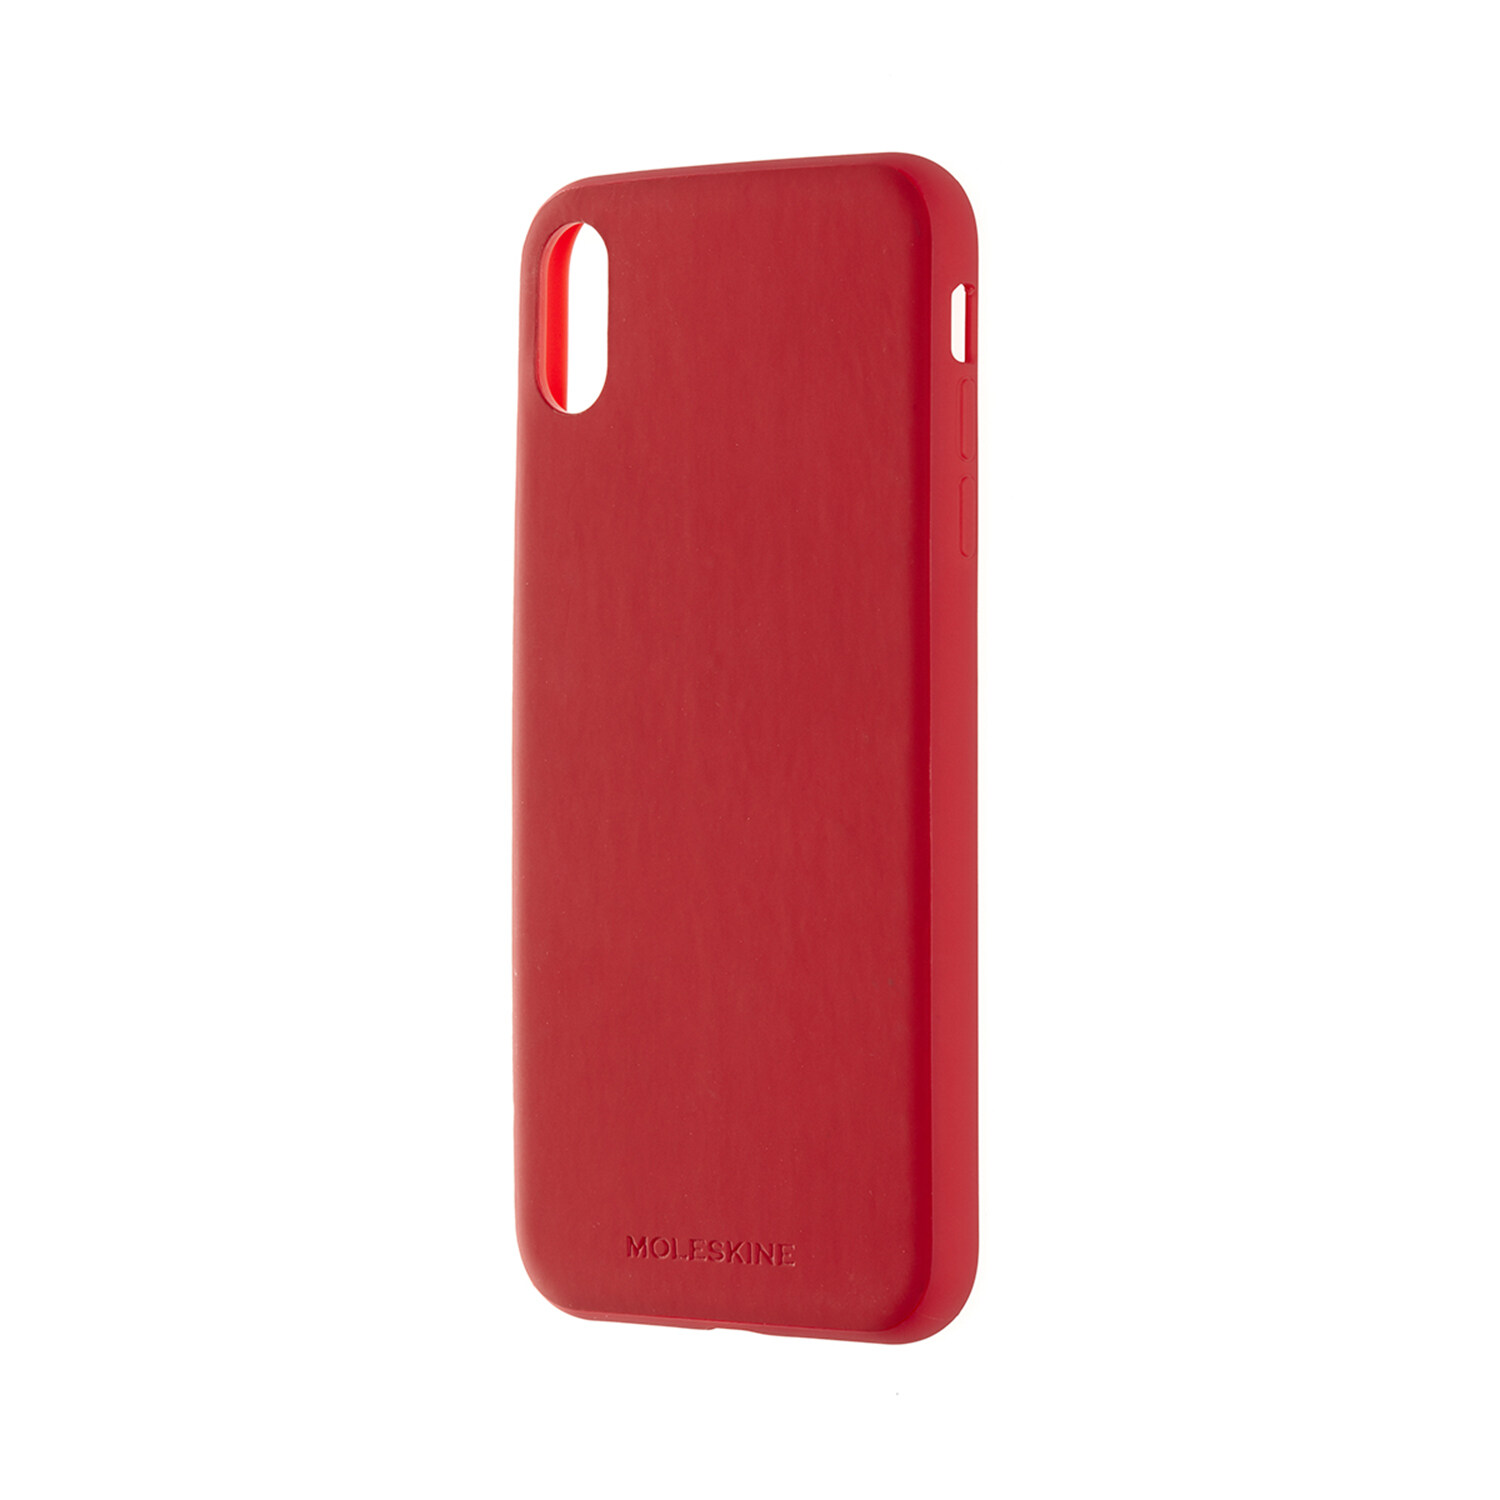 Moleskine Hard Case Soft Scarlet Red iPhone XS Max (Other)